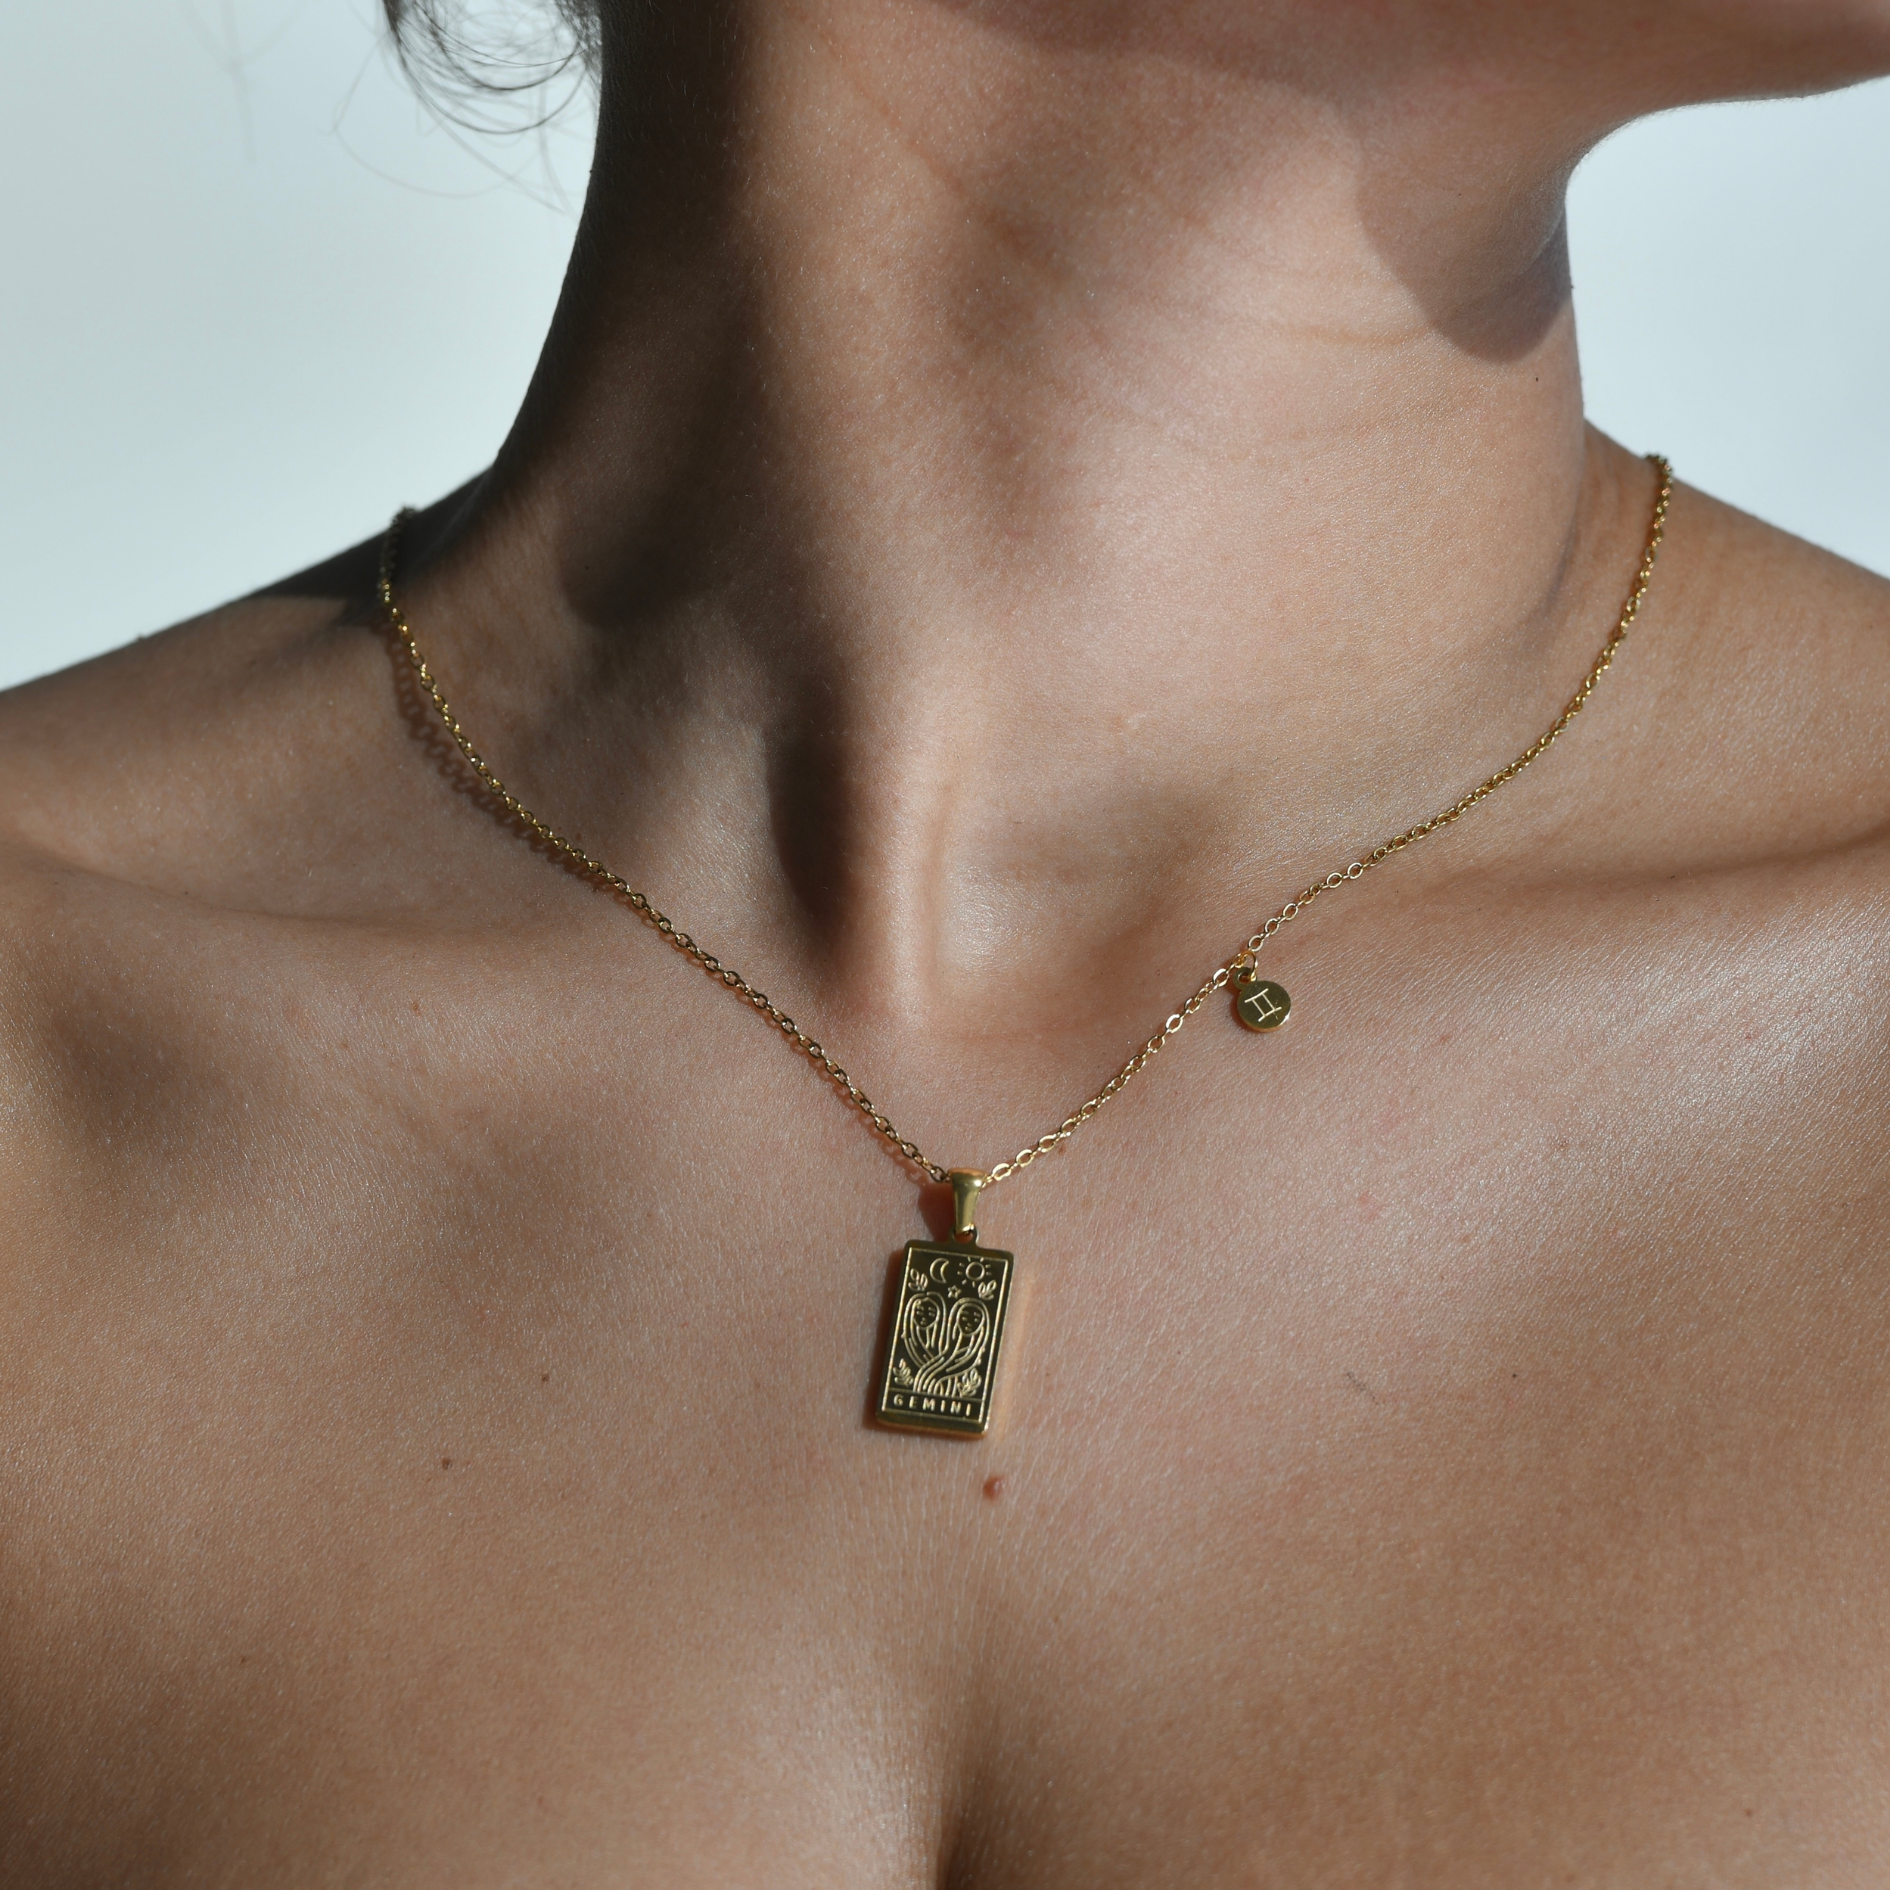 GEMINI Zodiac Pendant Gold Necklace - Gold chain necklace with gemini engraved in a vertical rectangular shape pendant. at the bottom of the pendant is engraved the word "gemini". on the side of the pendant at the chain is attched a square charm with gemini symbol engraved on it.